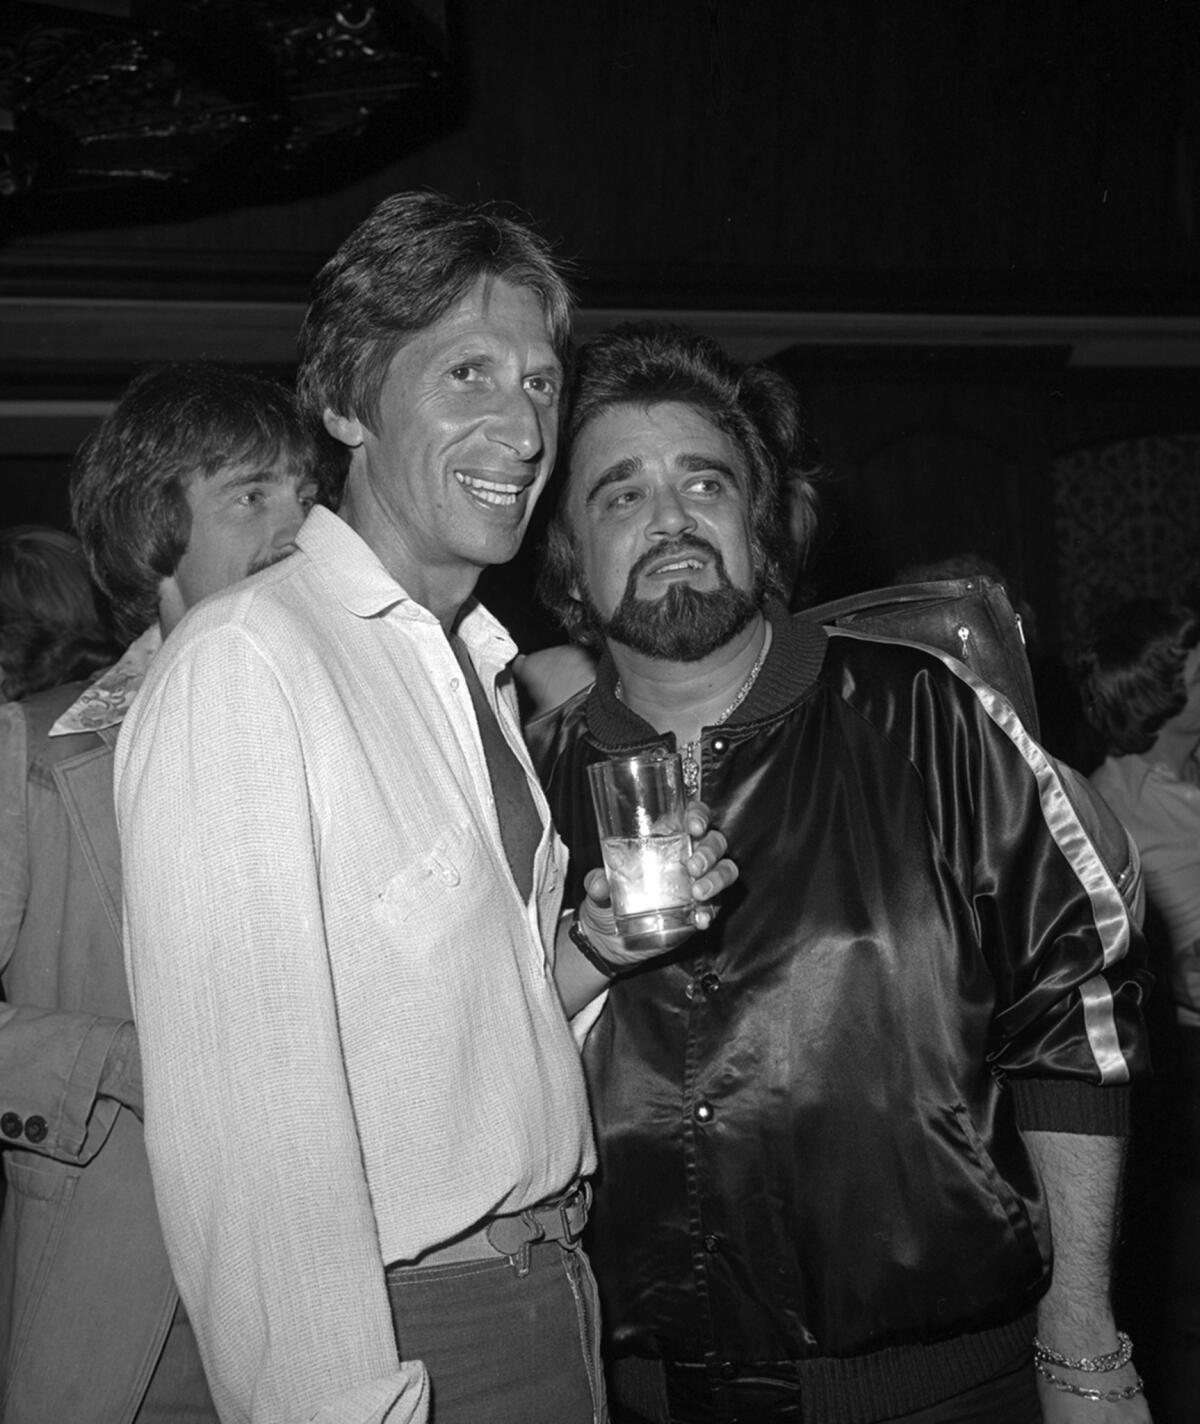 This 1979 photo released by the Las Vegas News Bureau shows David Brenner, left, and Wolfman Jack at the Riviera.